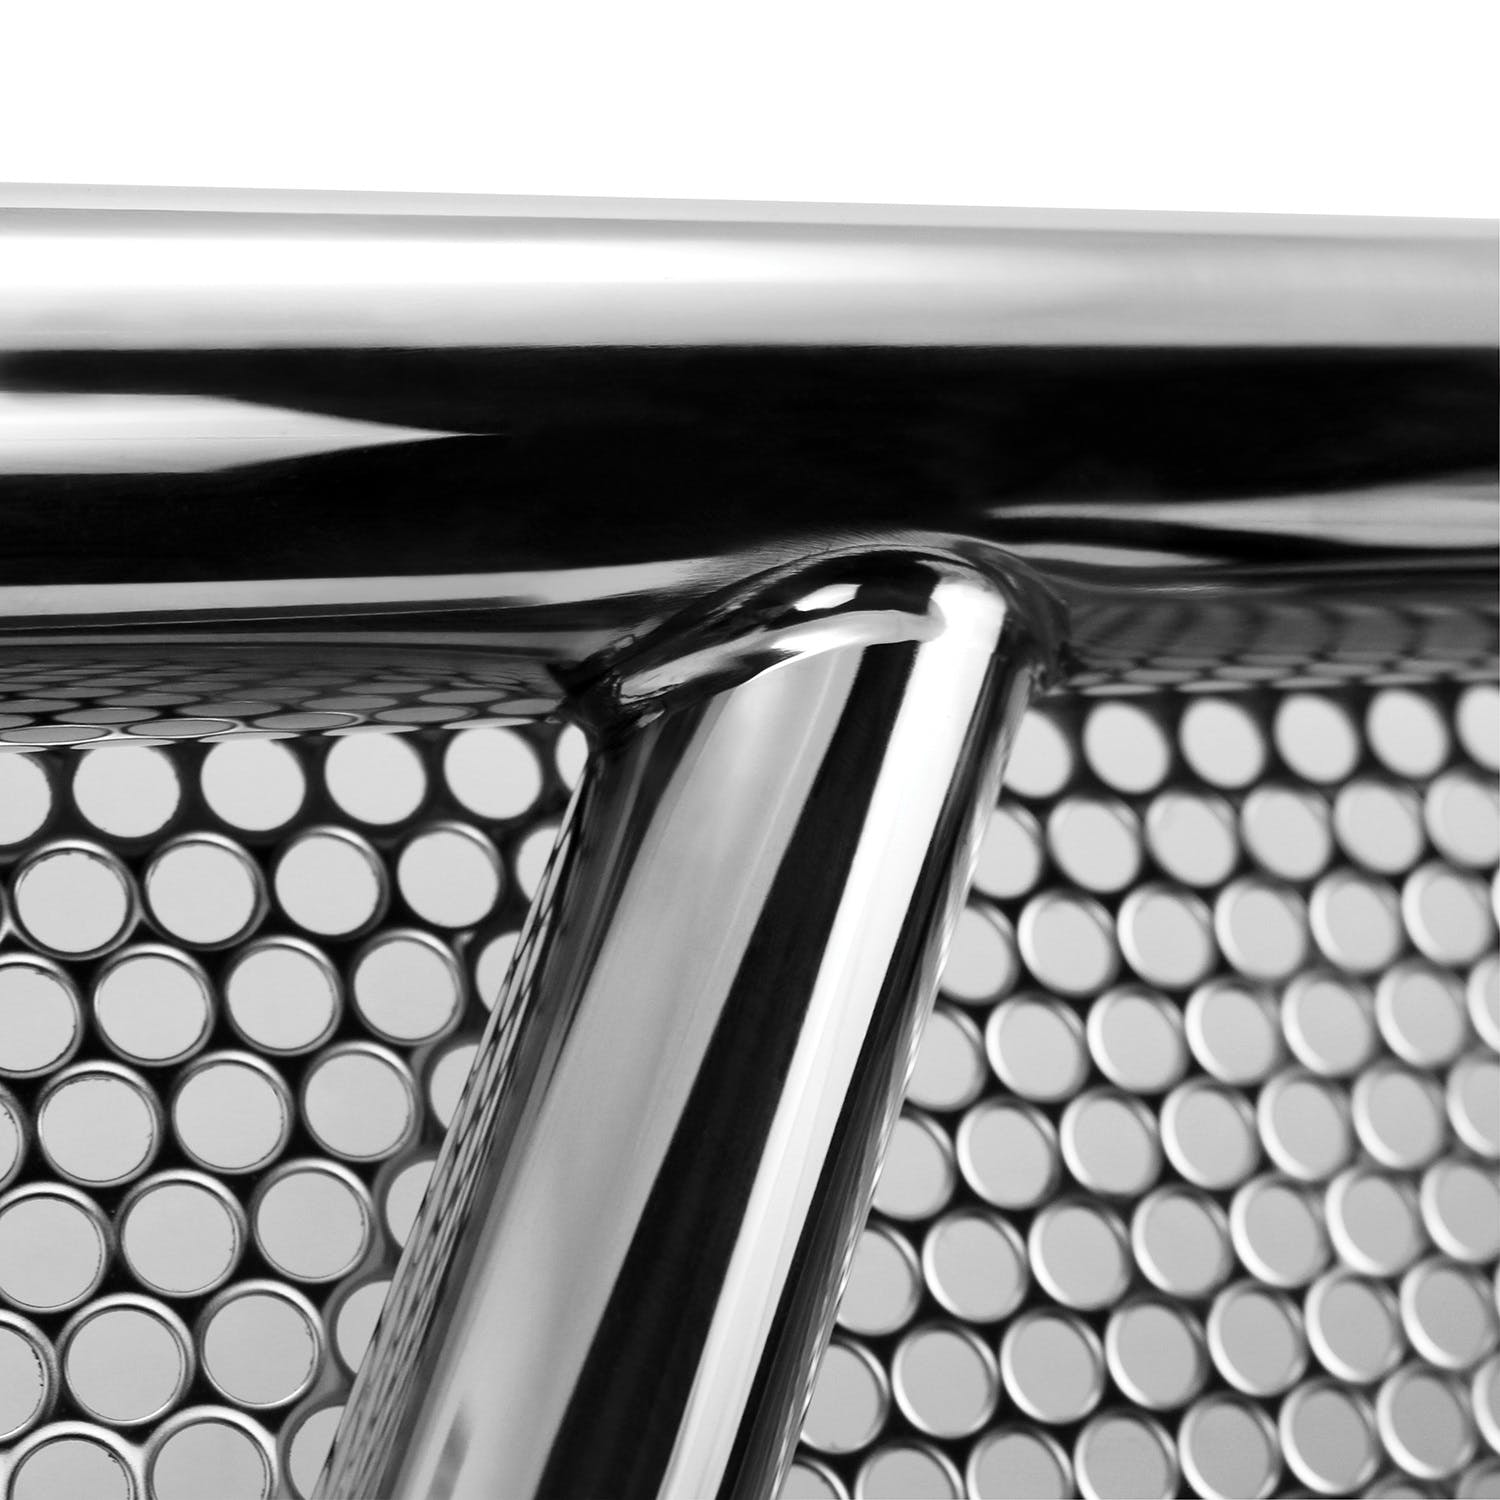 Westin Automotive 57-2370 HDX Grille Guard Stainless Steel